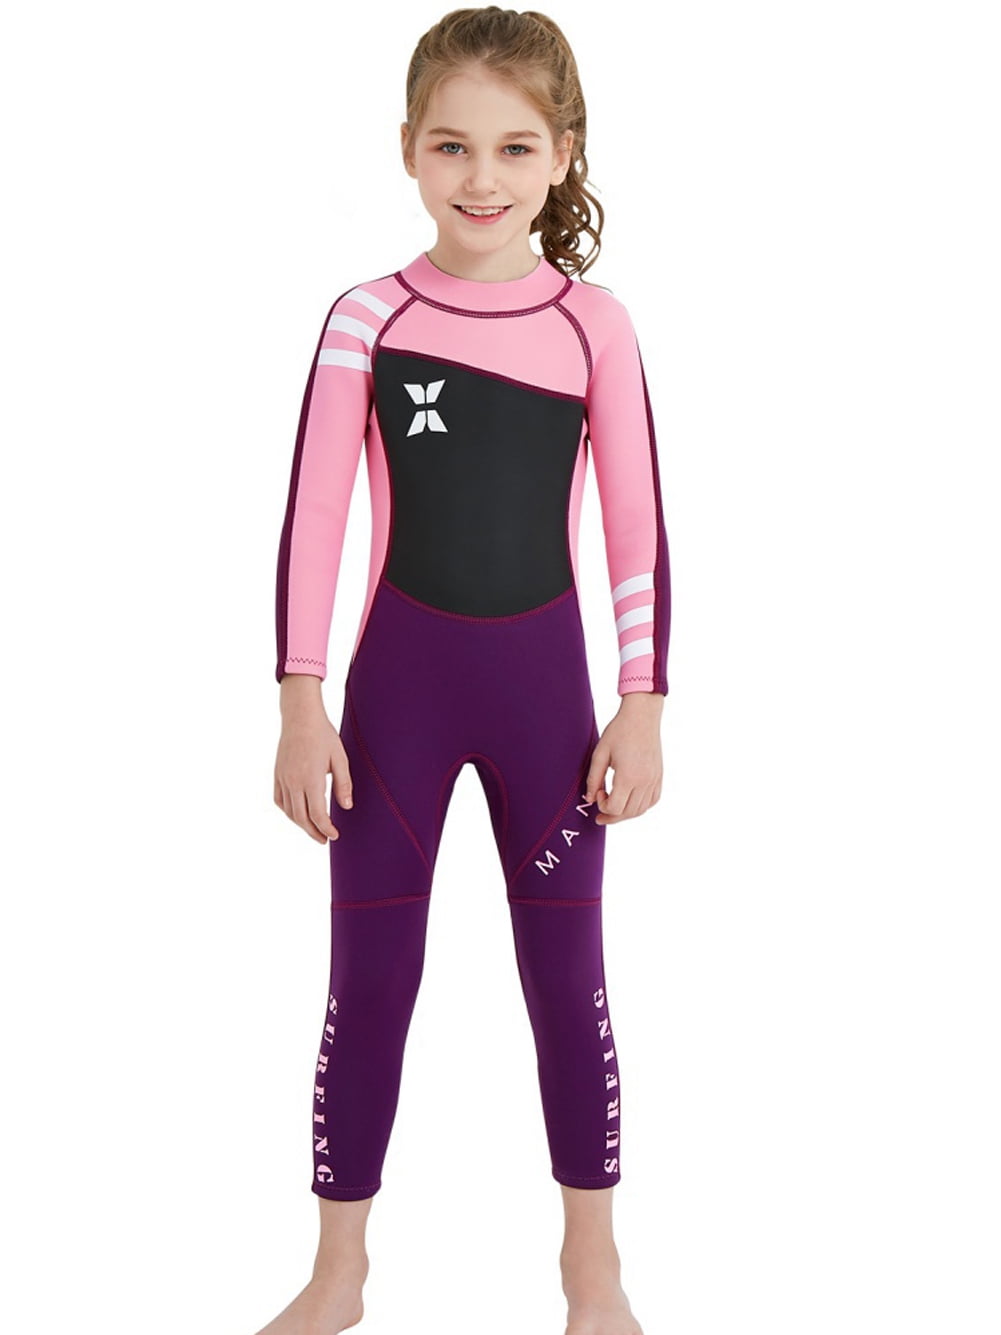 Details about   Kids Wetsuit Short Sleeve Diving Surfing Fast Drying Surf Swimming Clothes Suit 